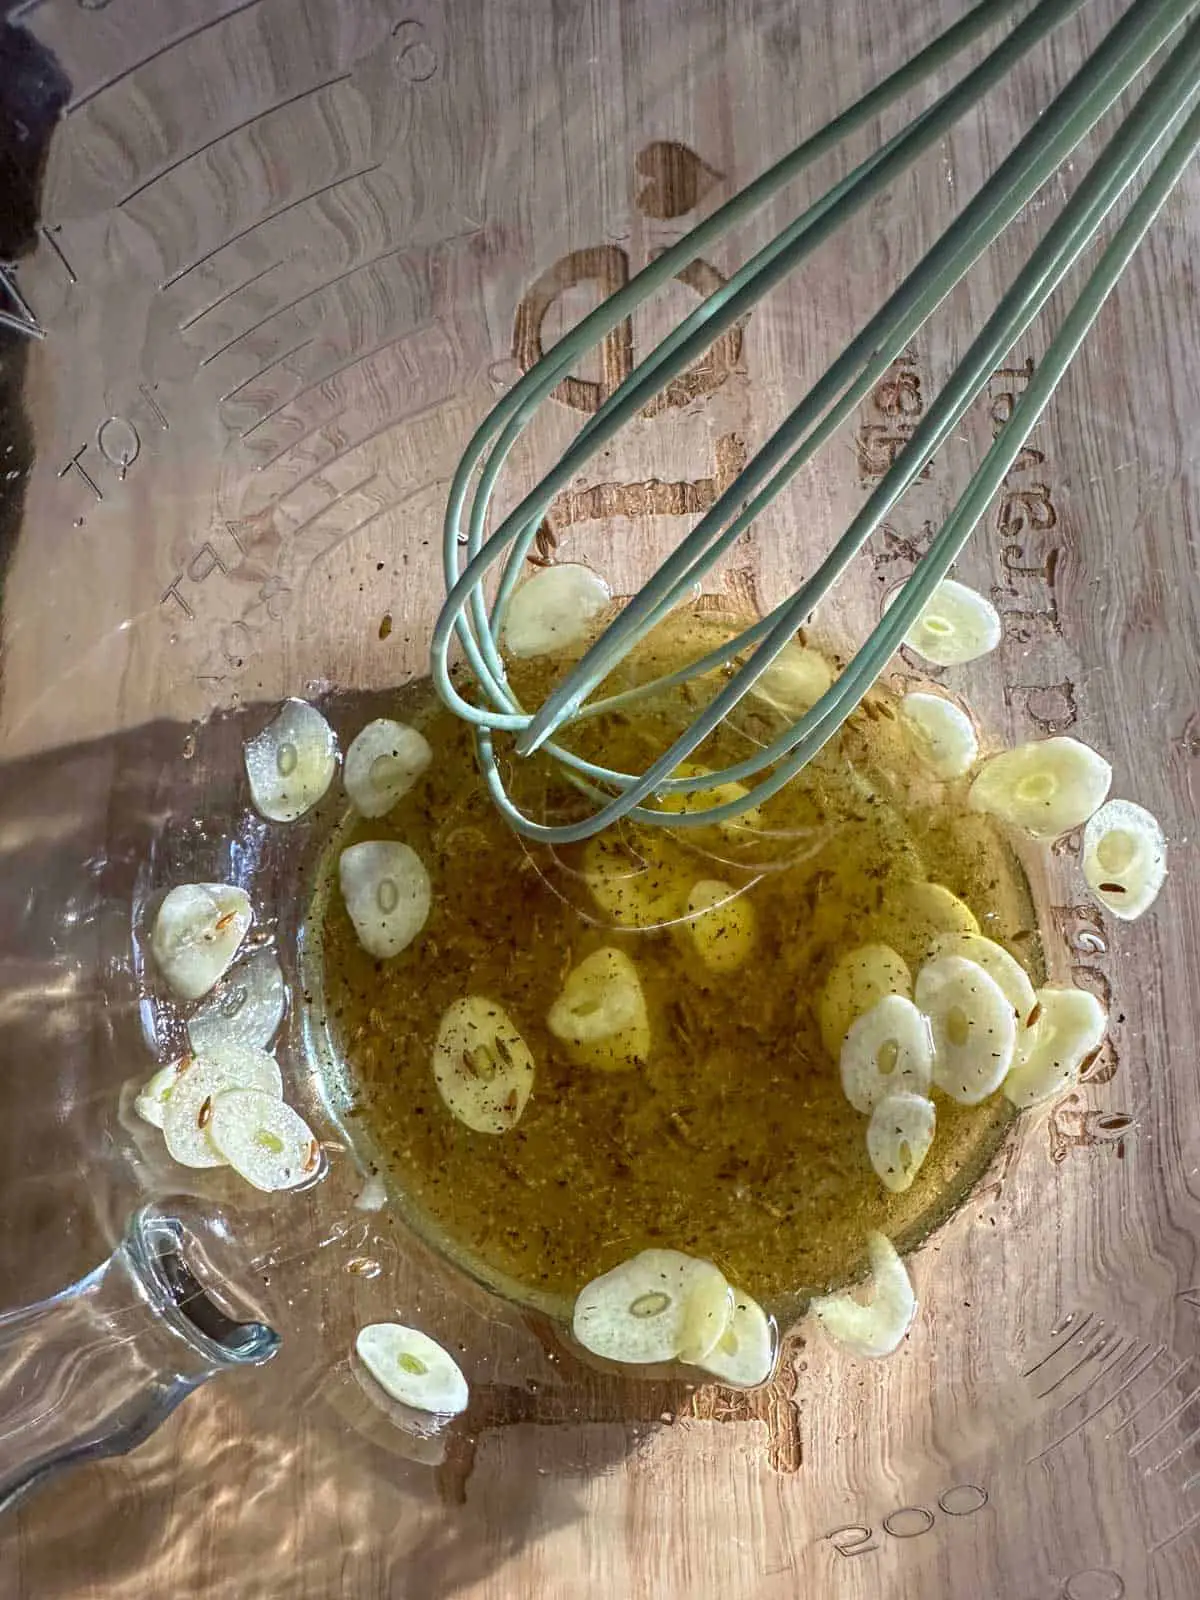 Sliced garlic, olive oil, cumin seeds, salt and pepper in a glass bowl with a whisk.